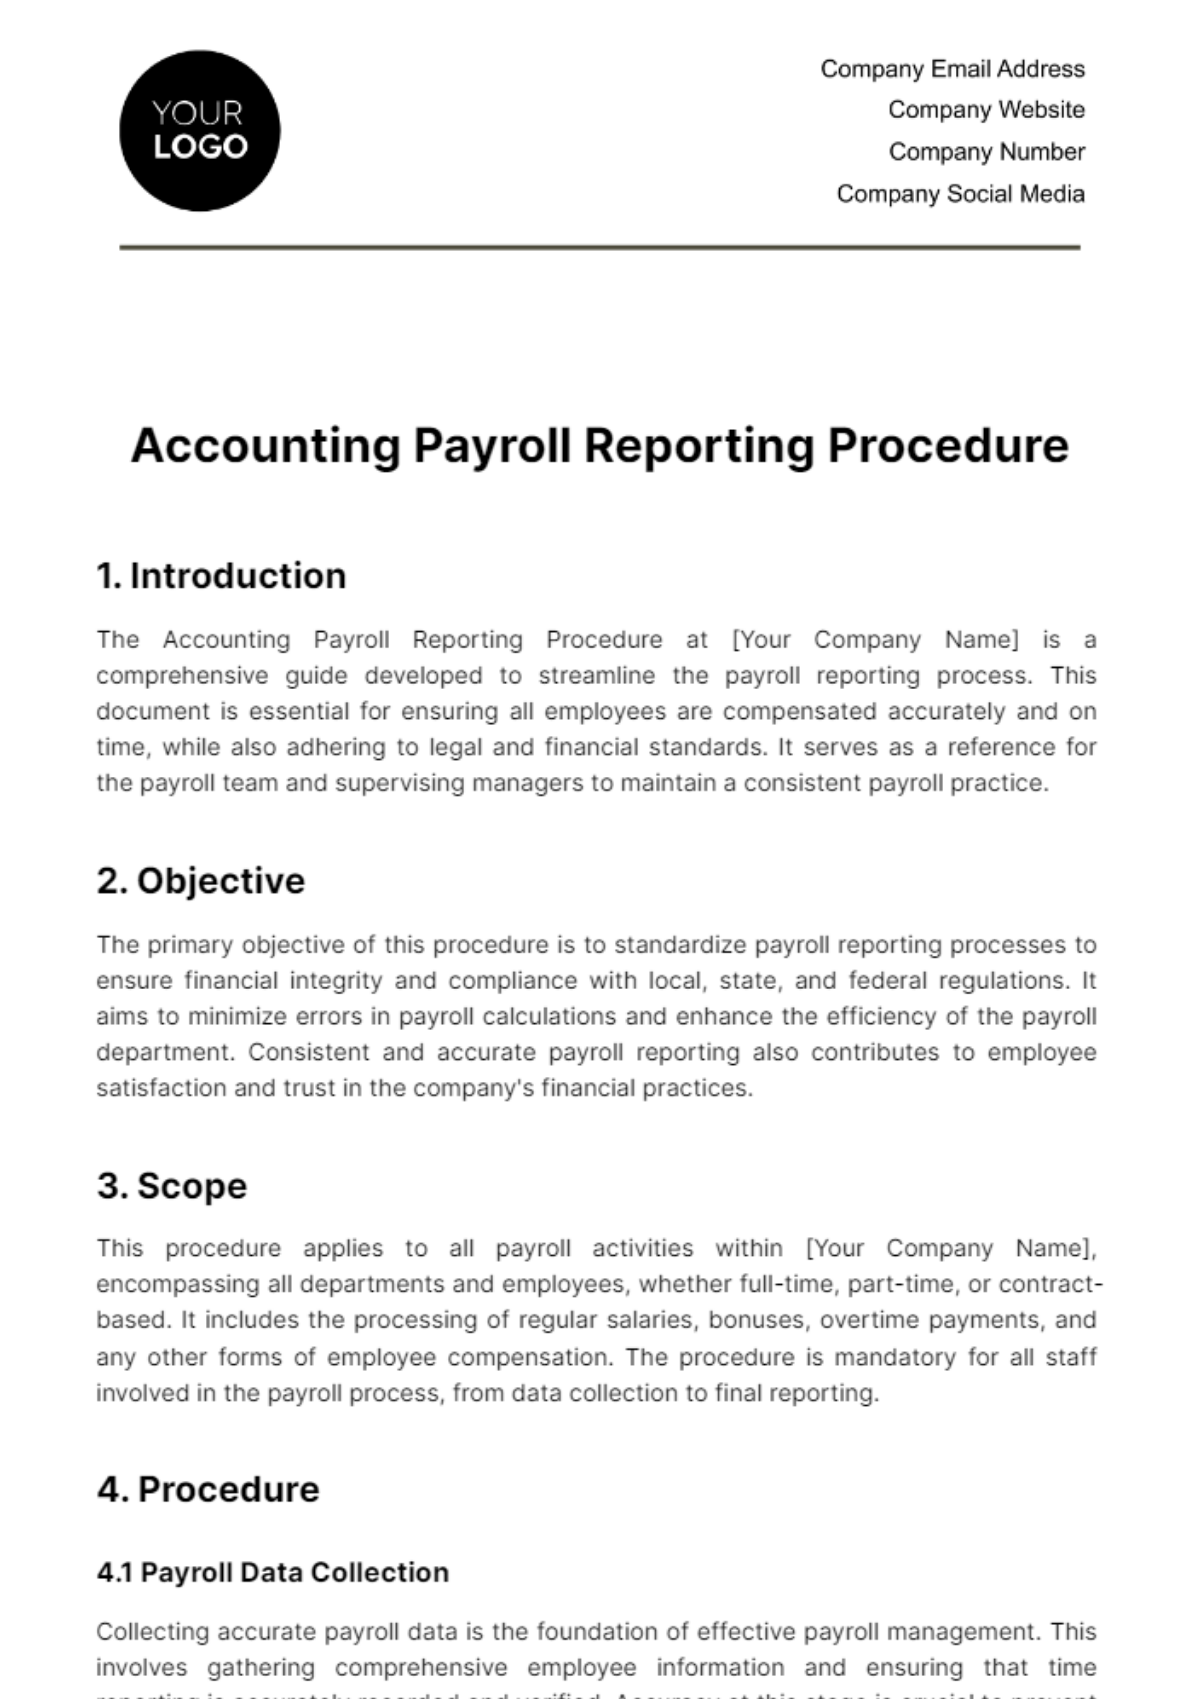 Accounting Payroll Reporting Procedure Template